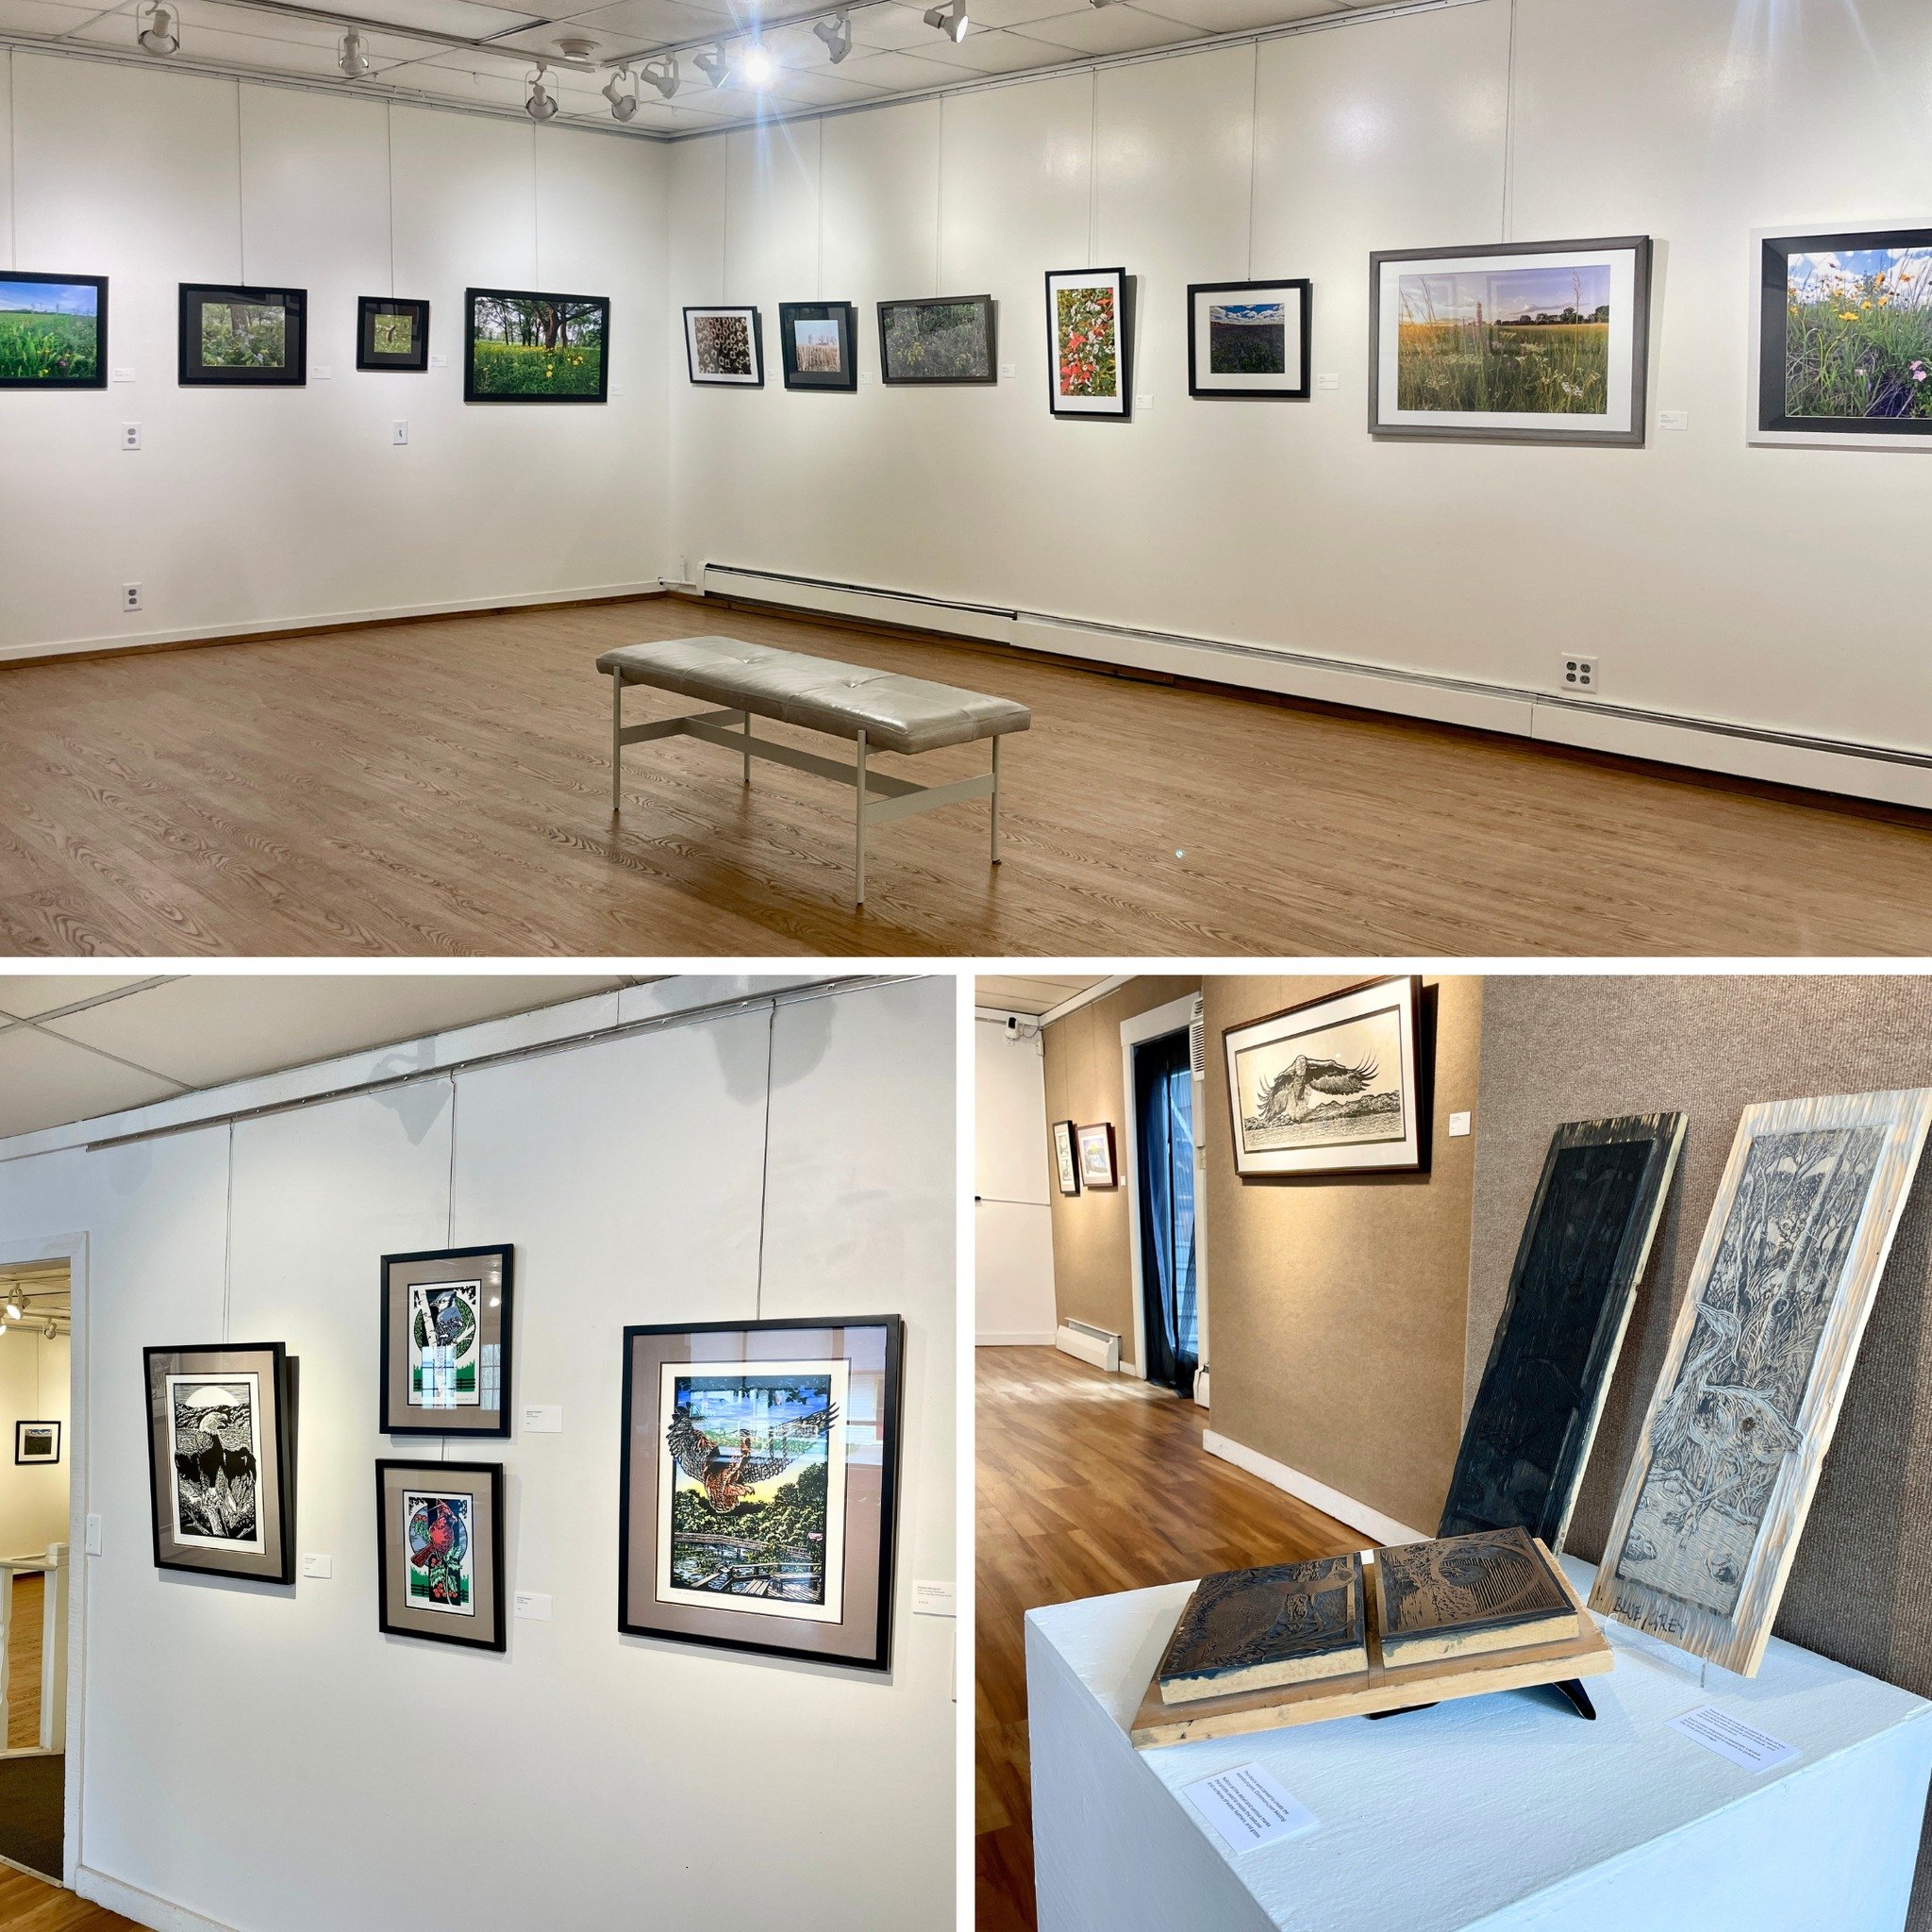 RECEPTION &amp; 3RD FRIDAY REMINDER! CAC's Birds of the Hudson: Block Prints by Stephen Rengstorf + Prairies Big and Small: Photographs by Susan Kirt exhibition, will have an artists reception this Friday, May 17 from 4-7PM. There will be a cash bar,